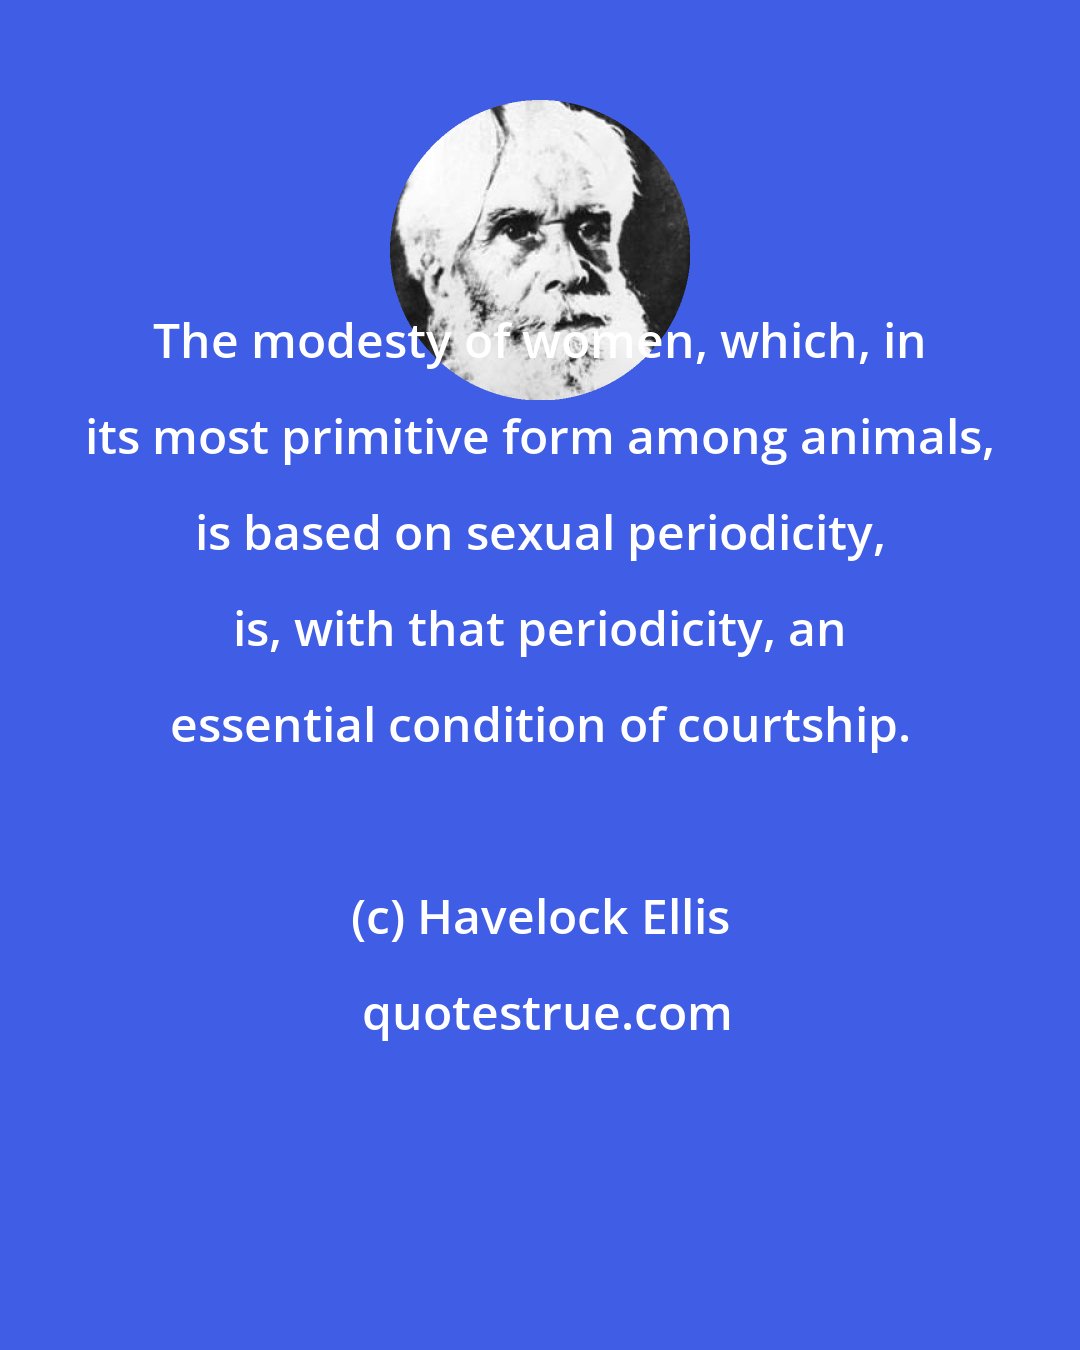 Havelock Ellis: The modesty of women, which, in its most primitive form among animals, is based on sexual periodicity, is, with that periodicity, an essential condition of courtship.